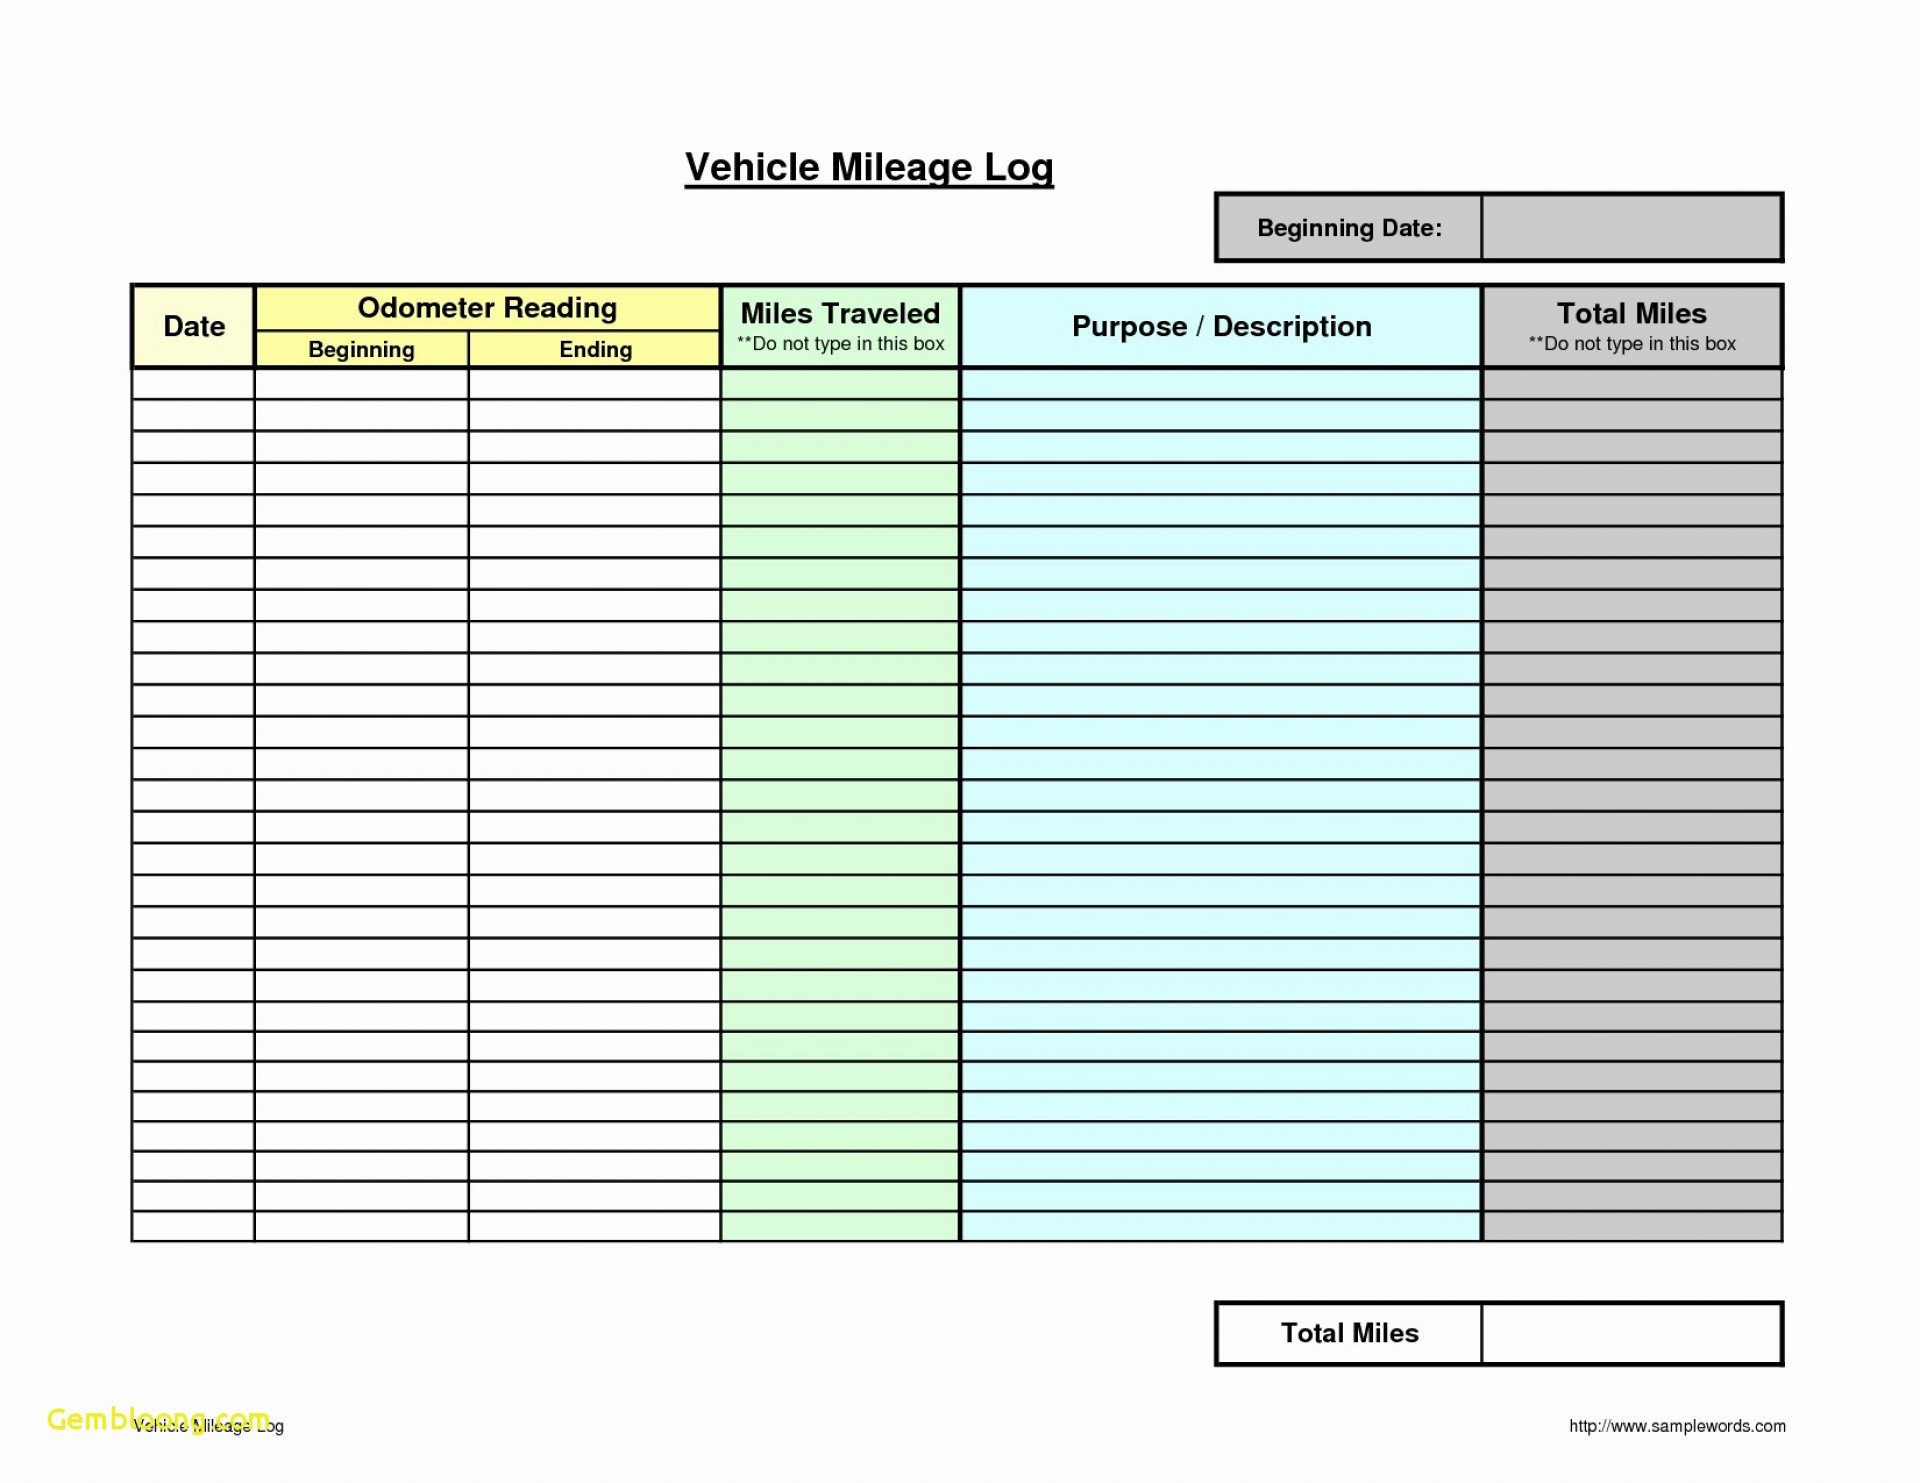 Maximize Your Tax Deductions How to Claim Mileage Expenses.jpg